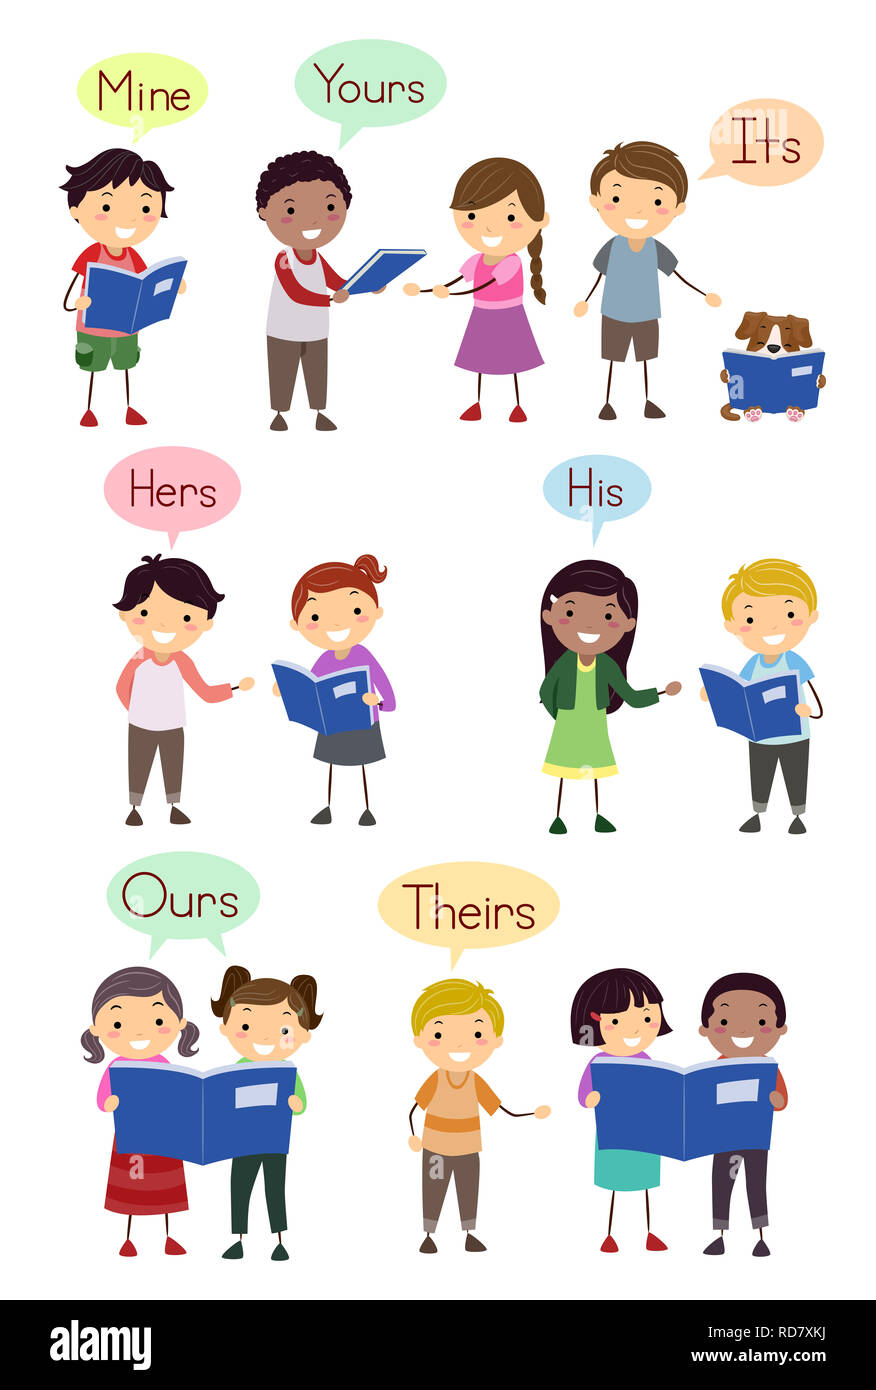 illustration-of-stickman-kids-showing-examples-of-possessive-pronouns-like-mine-yours-its